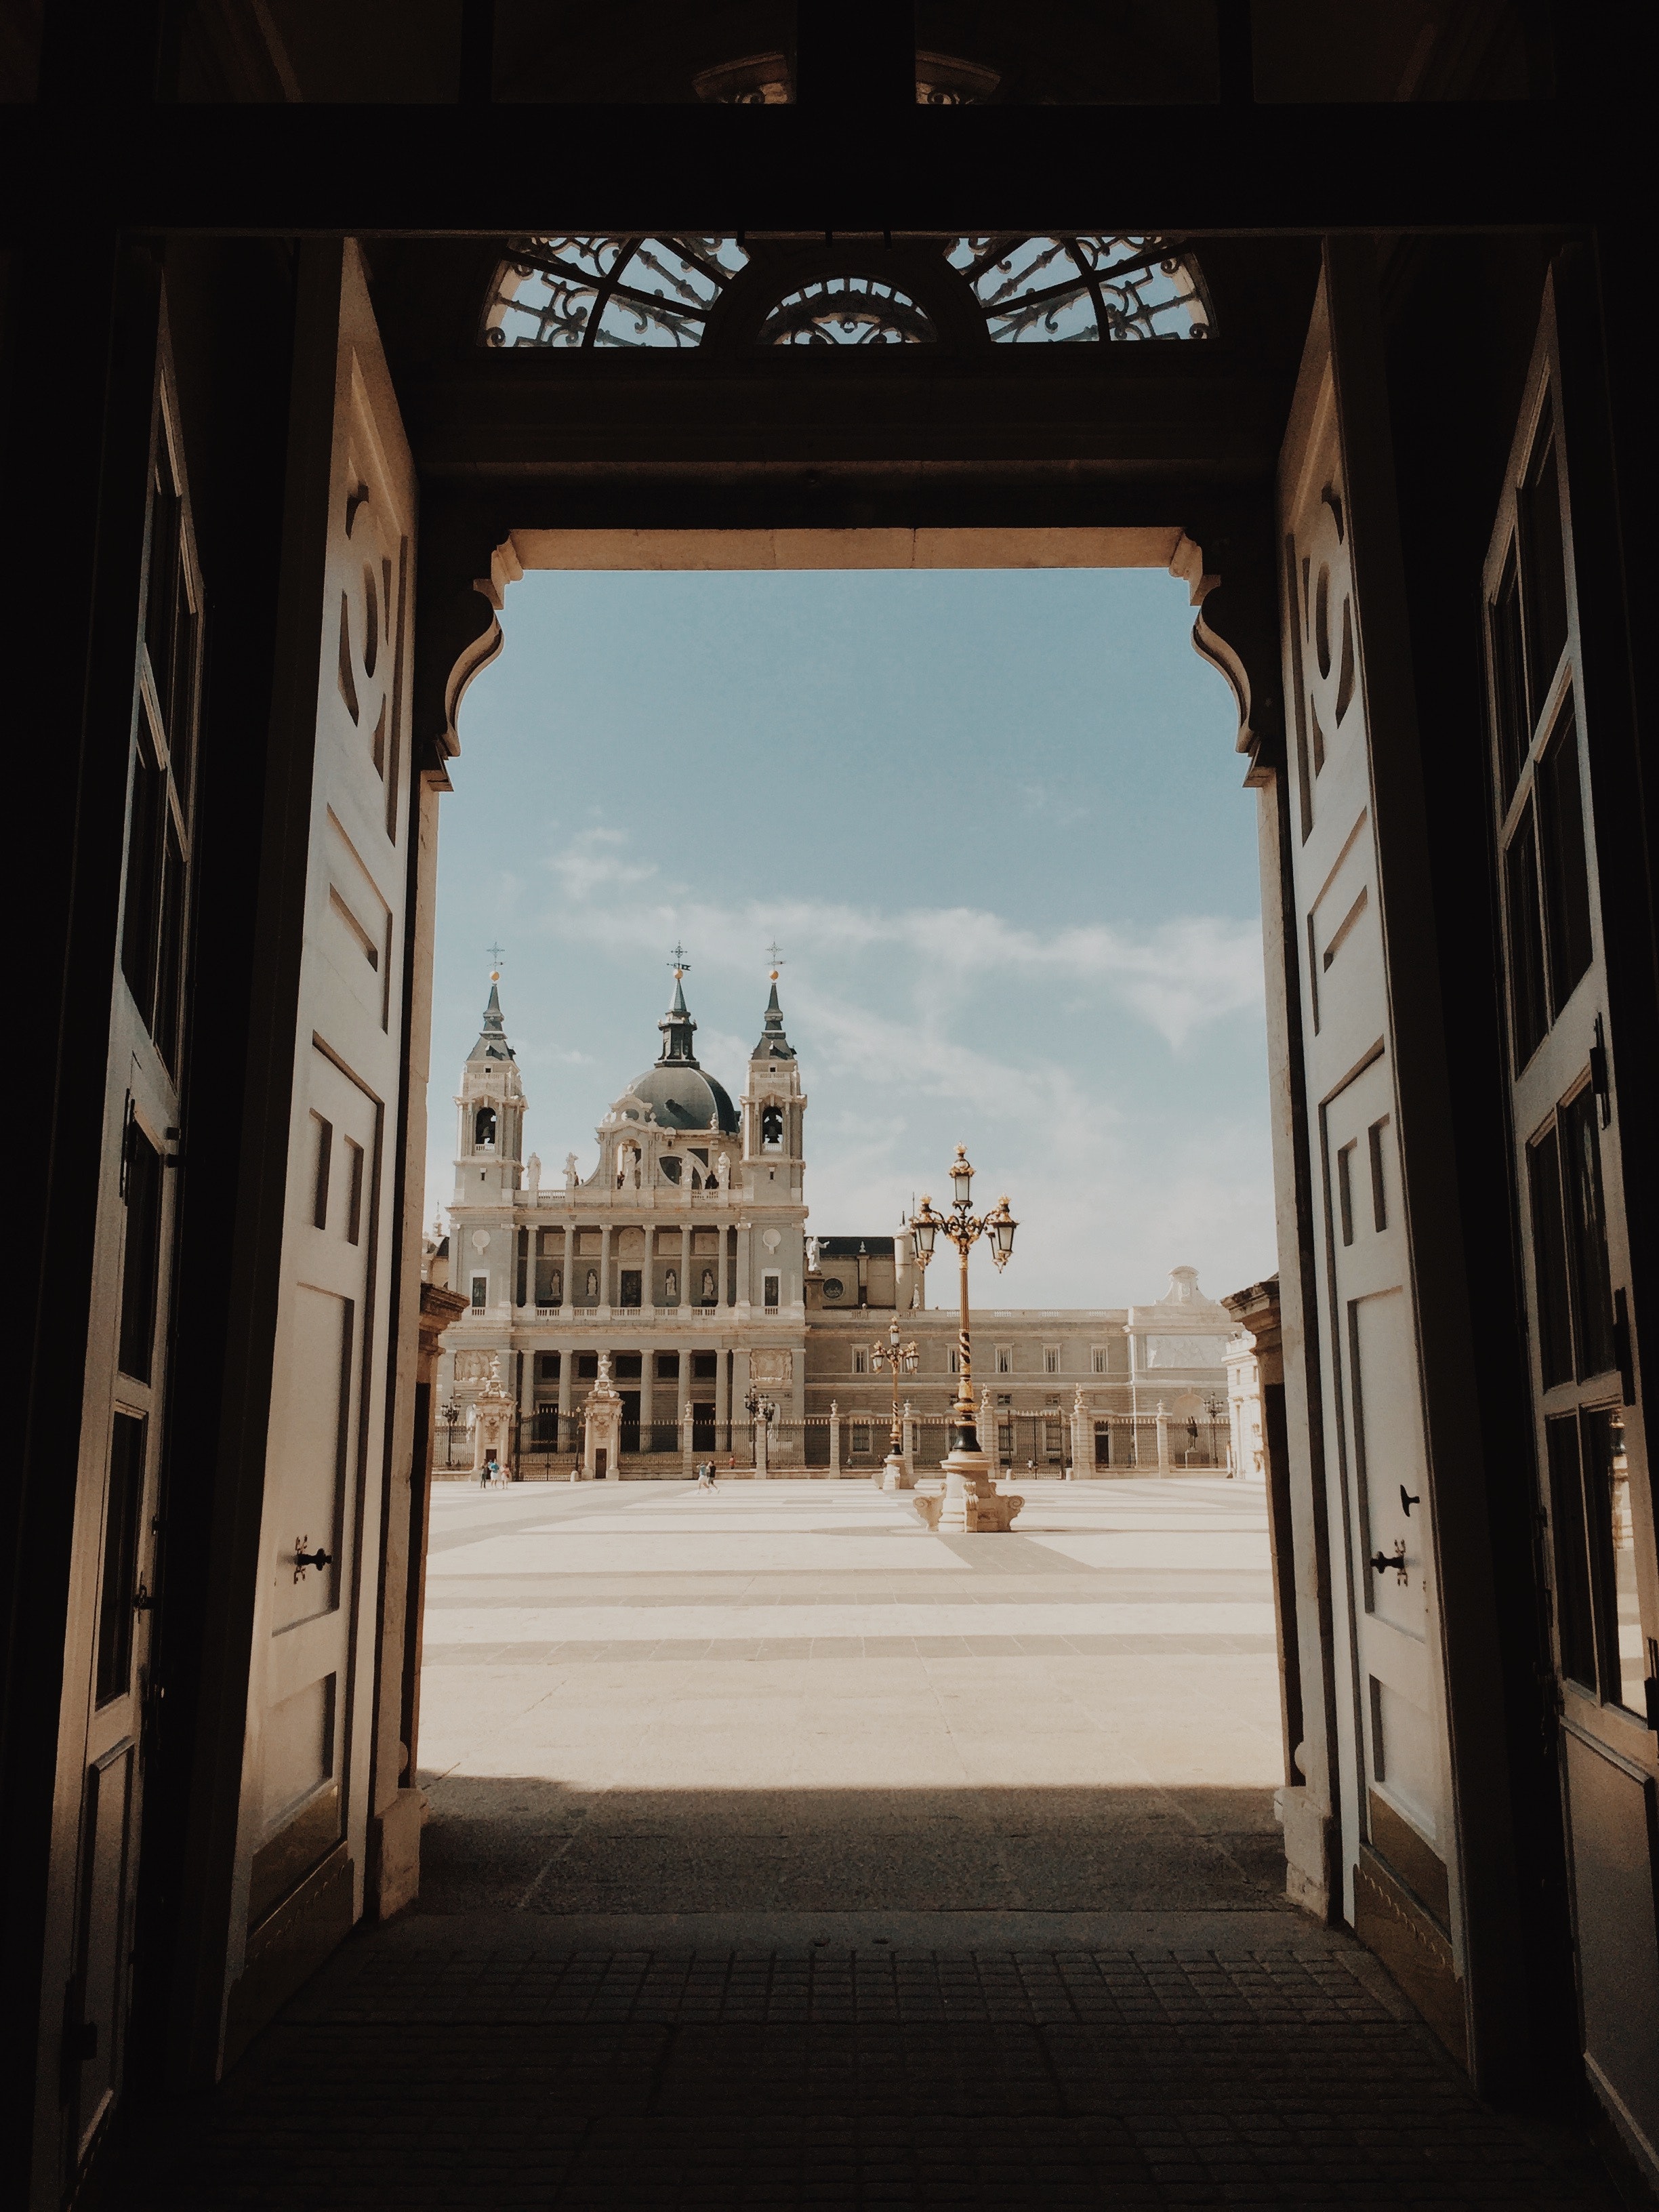 opened-door-with-view-of-cathedral-2406875